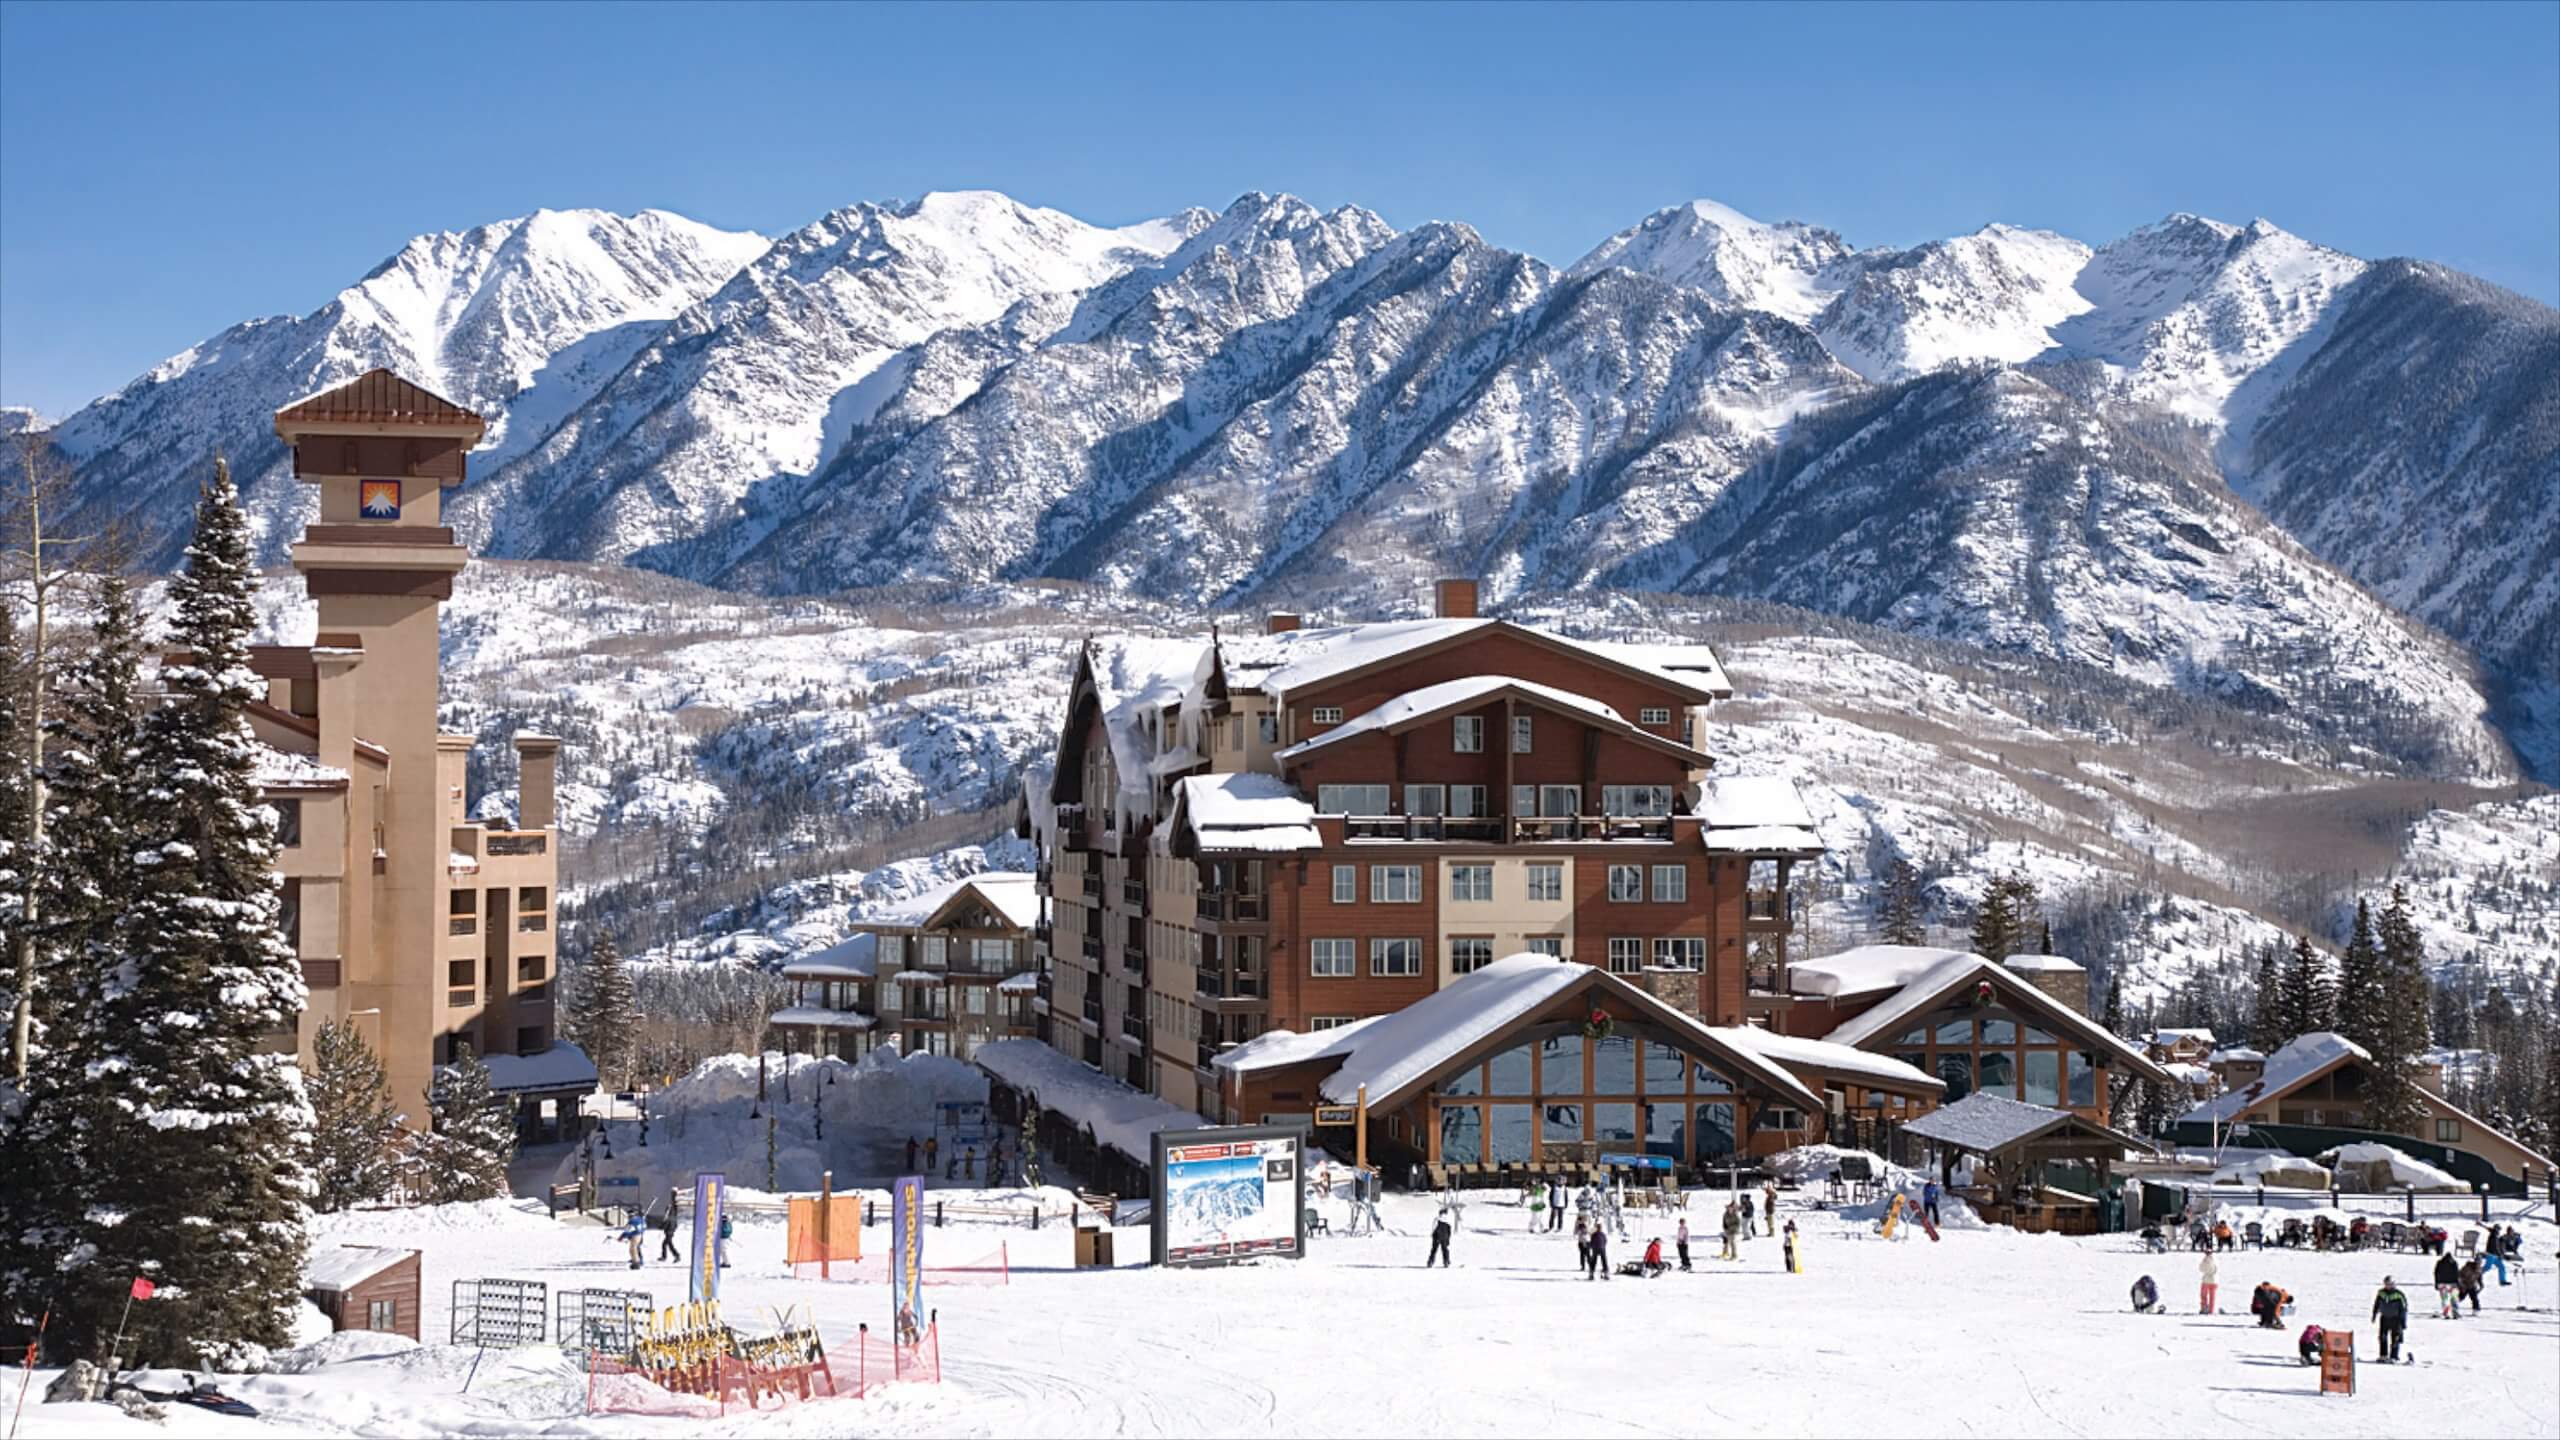 Ski resort with mountains in background